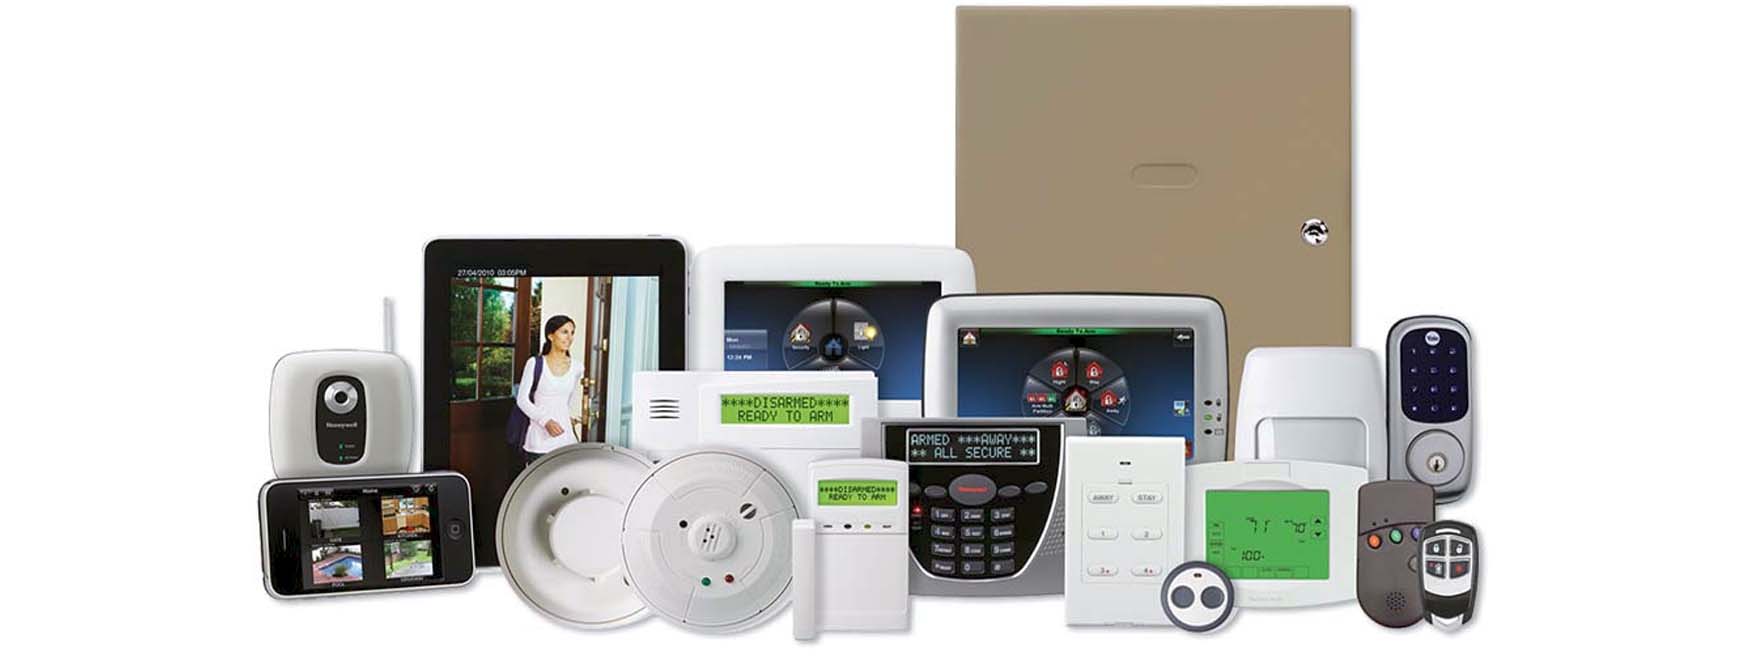 Honeywell Security Systems